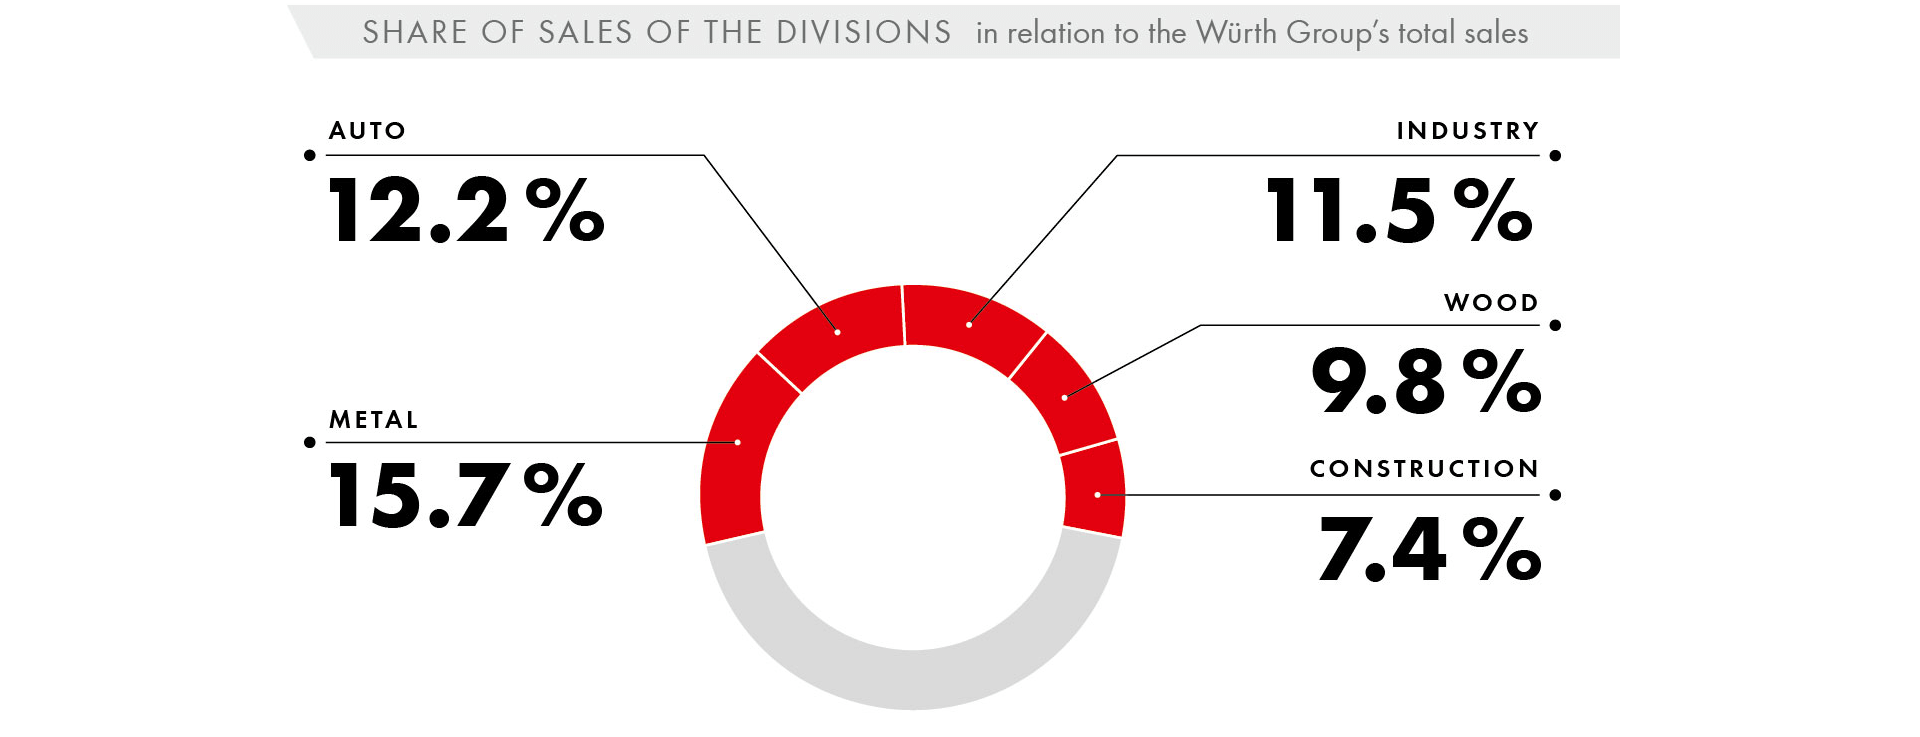 Share of sales of the divisions  in relation to the Würth Group’s total sales